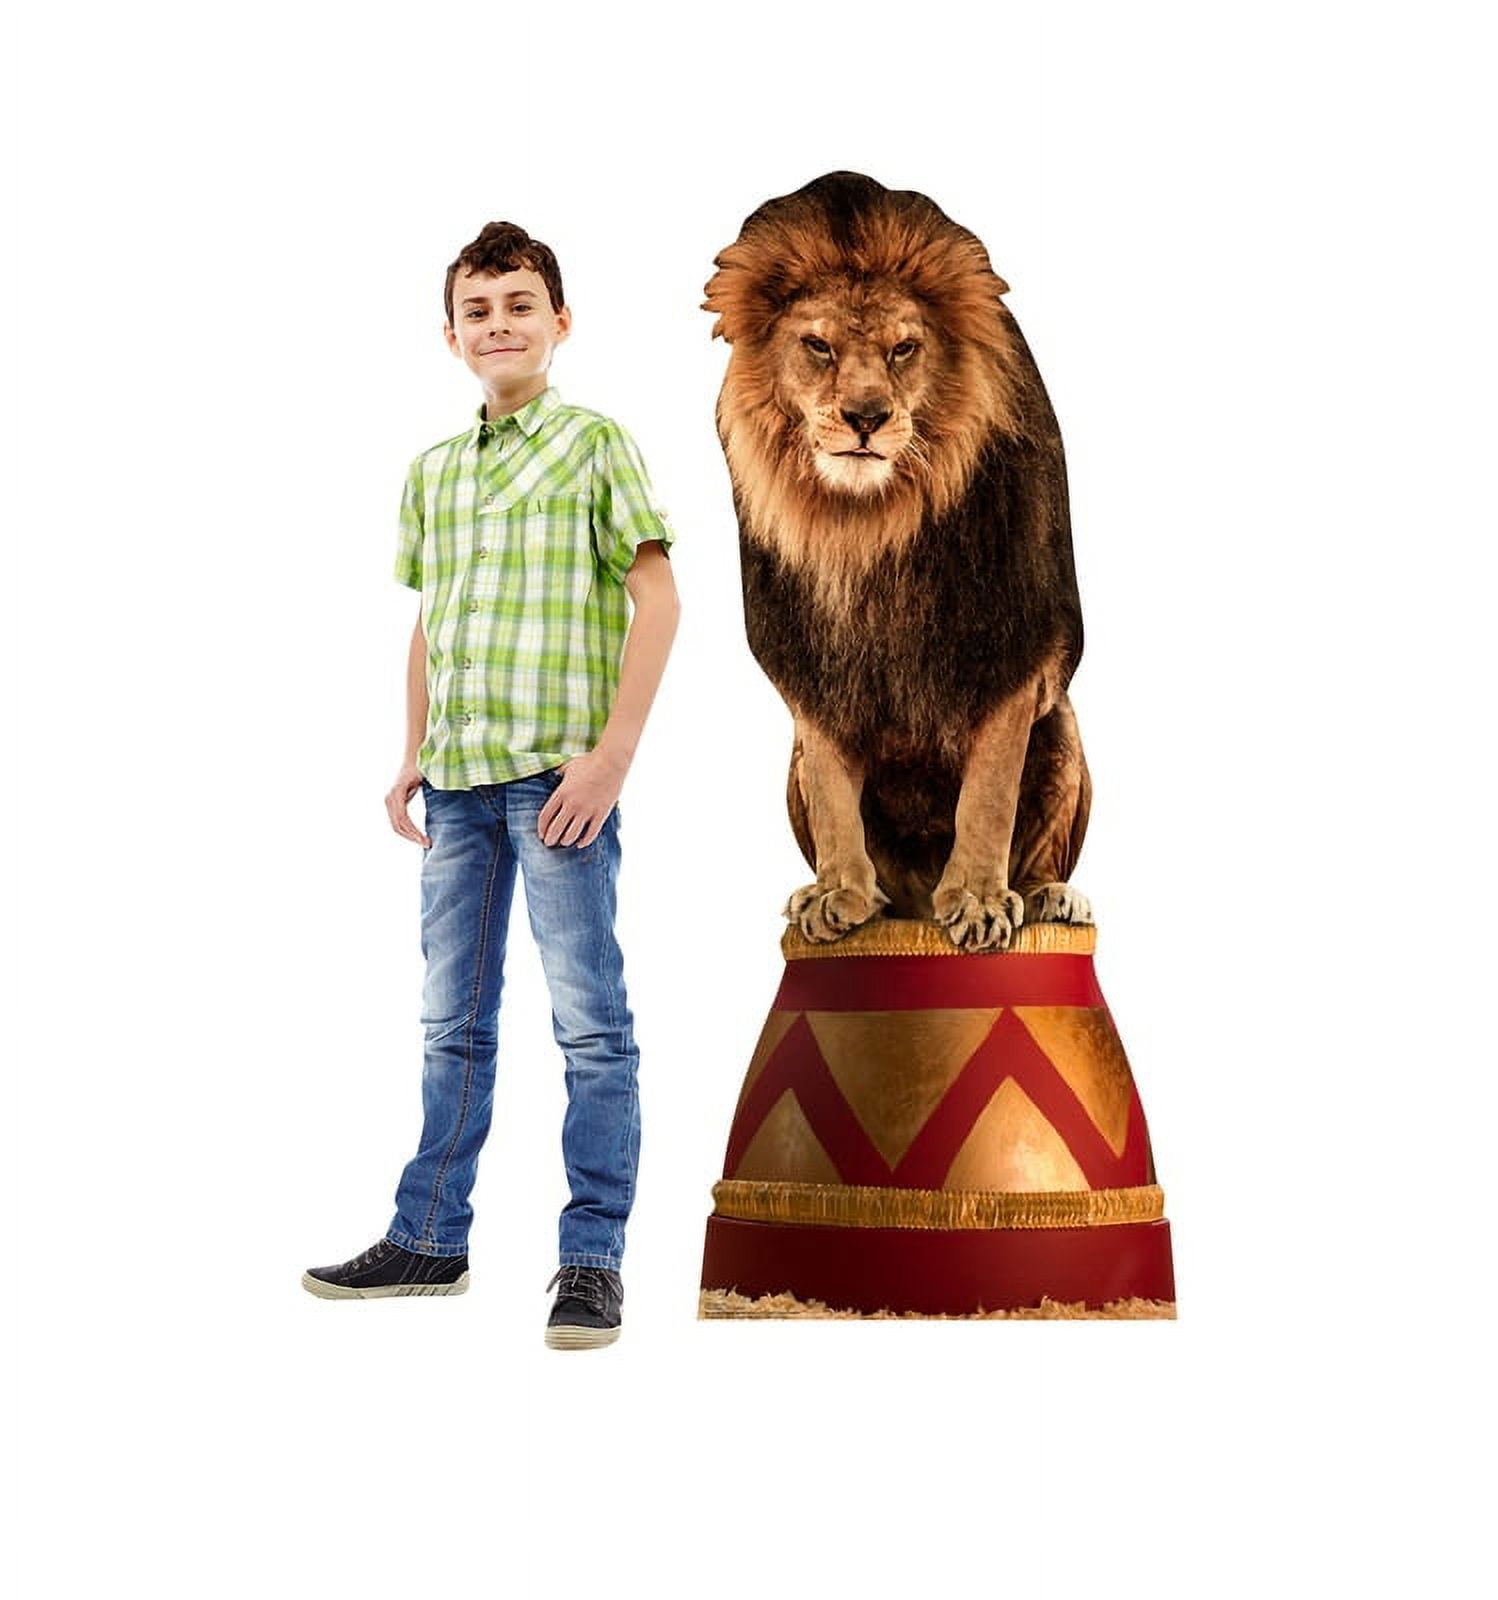 2691 26 X 63 In. Circus Lion Wall Decal